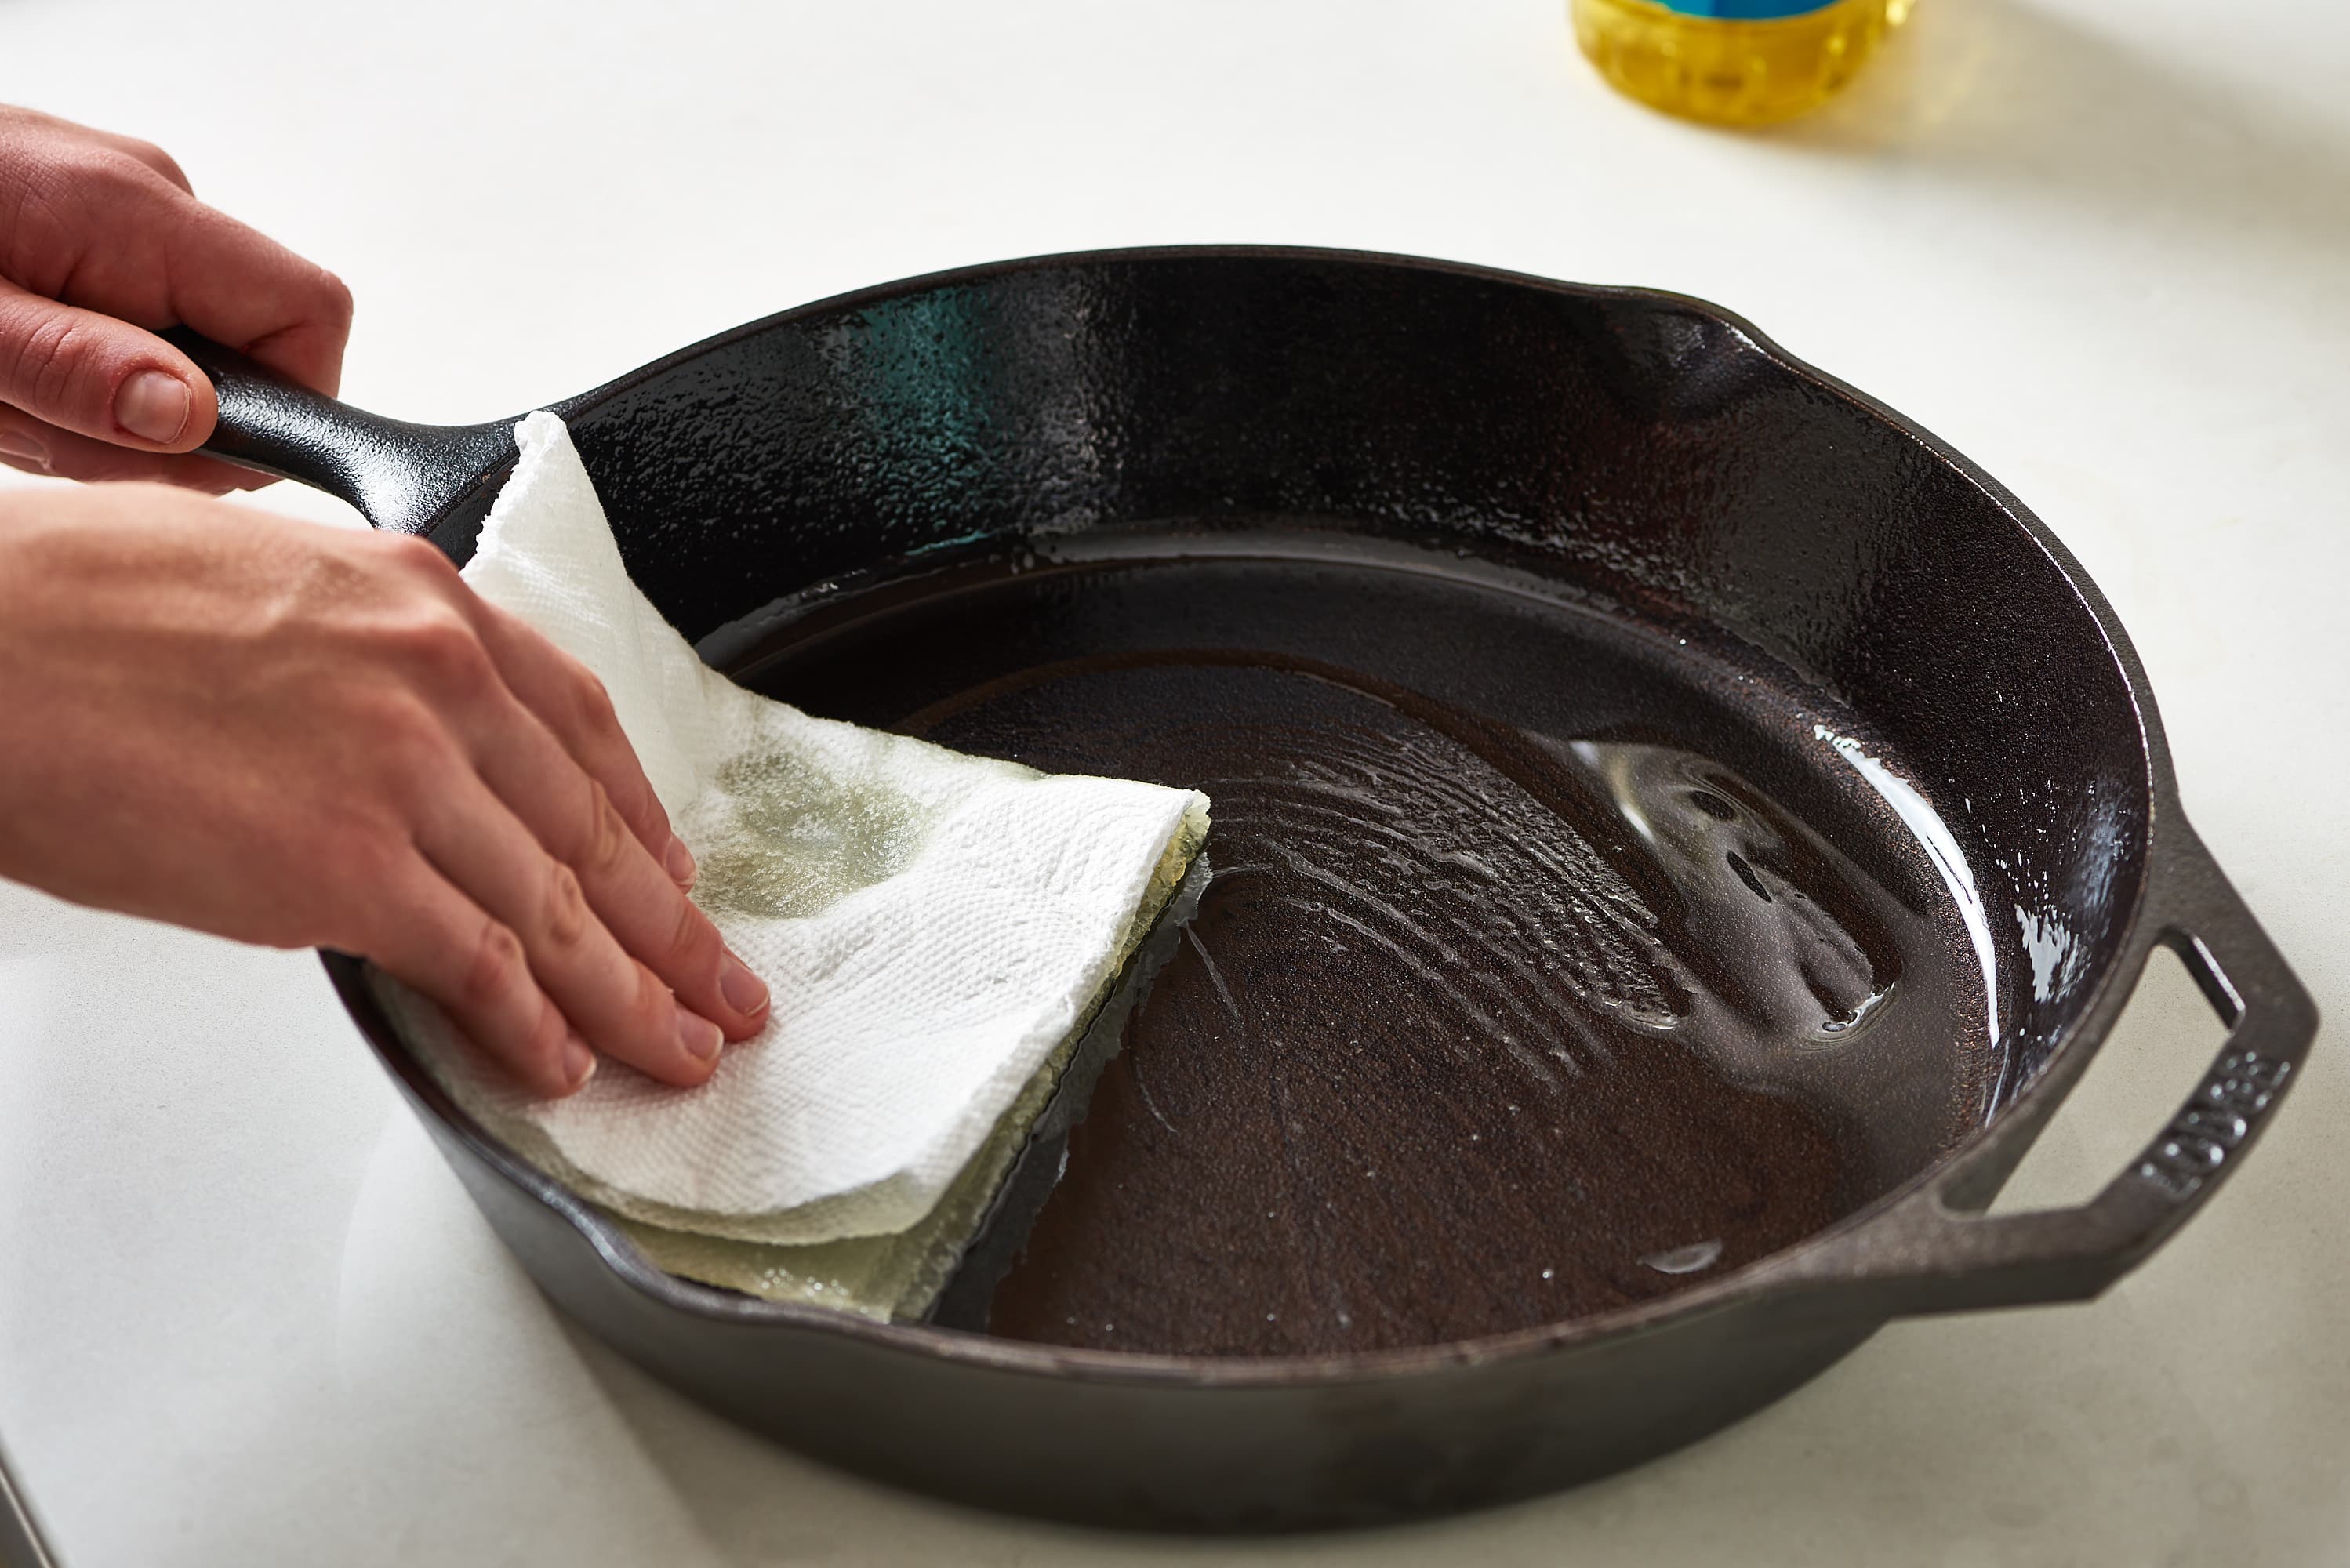 Cast Iron Skillets: Everything You Need To Know - How To 